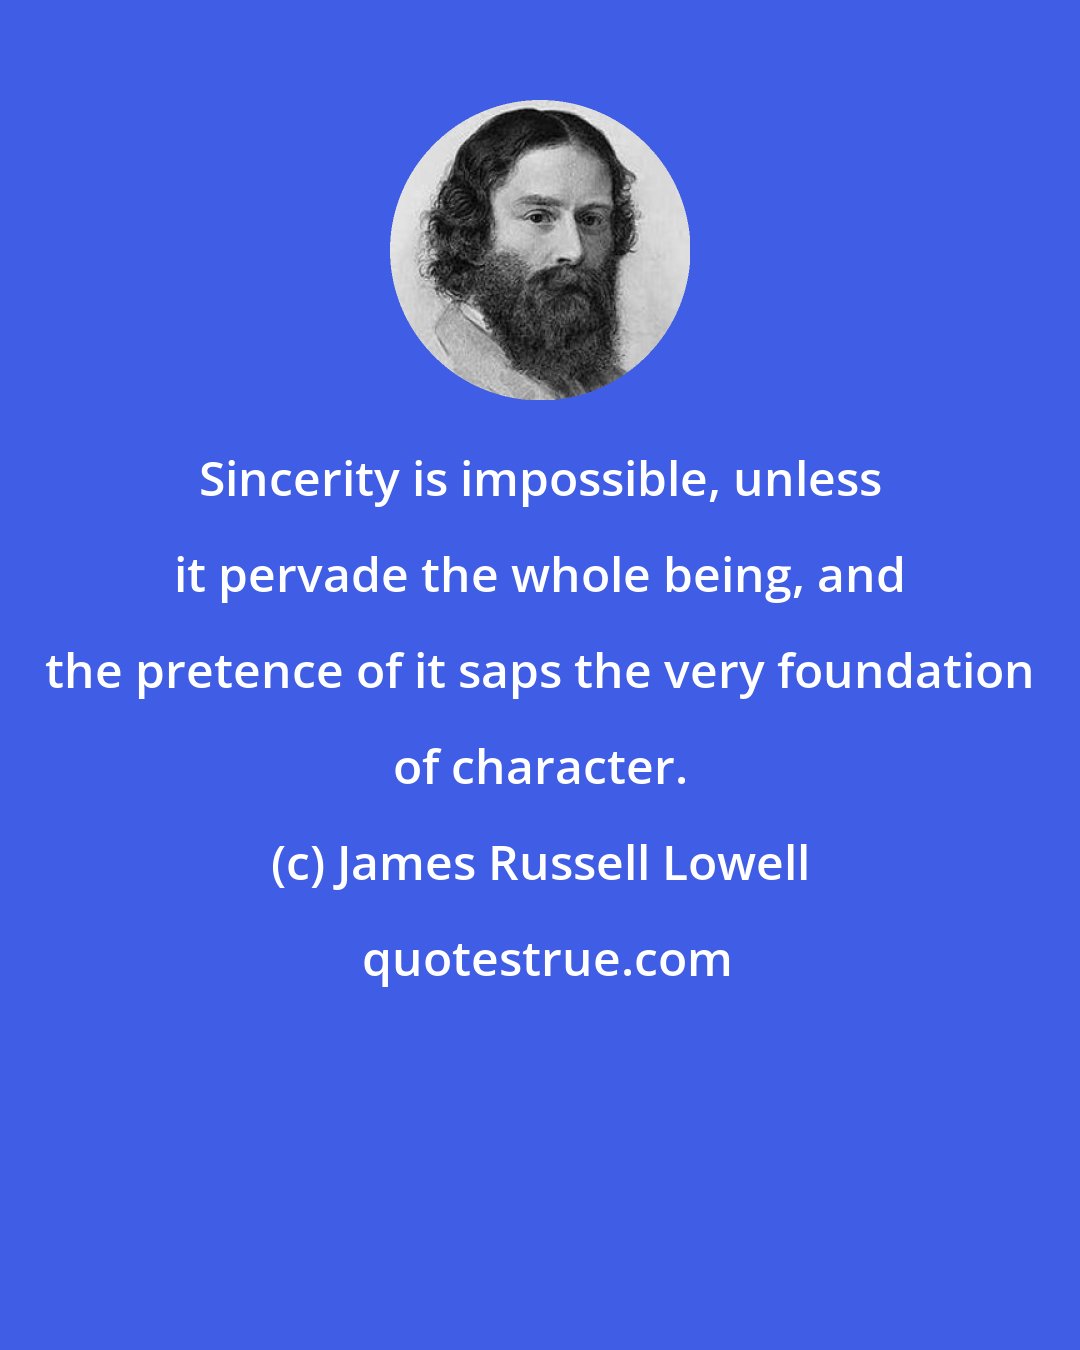 James Russell Lowell: Sincerity is impossible, unless it pervade the whole being, and the pretence of it saps the very foundation of character.